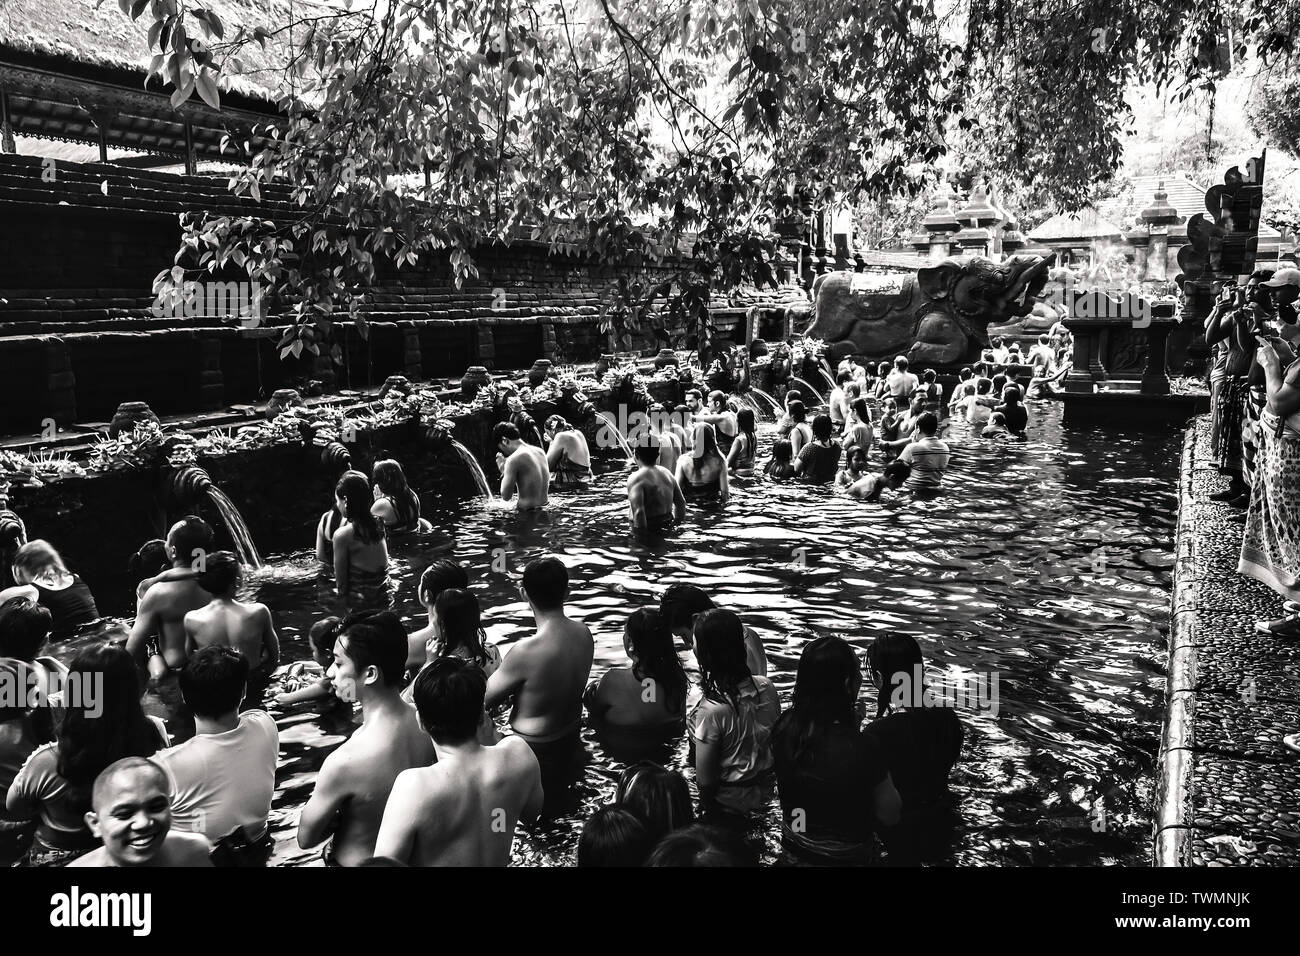 A Hindu ceremony in the Tirta Empul temple, Bali, Indonesia Stock Photo